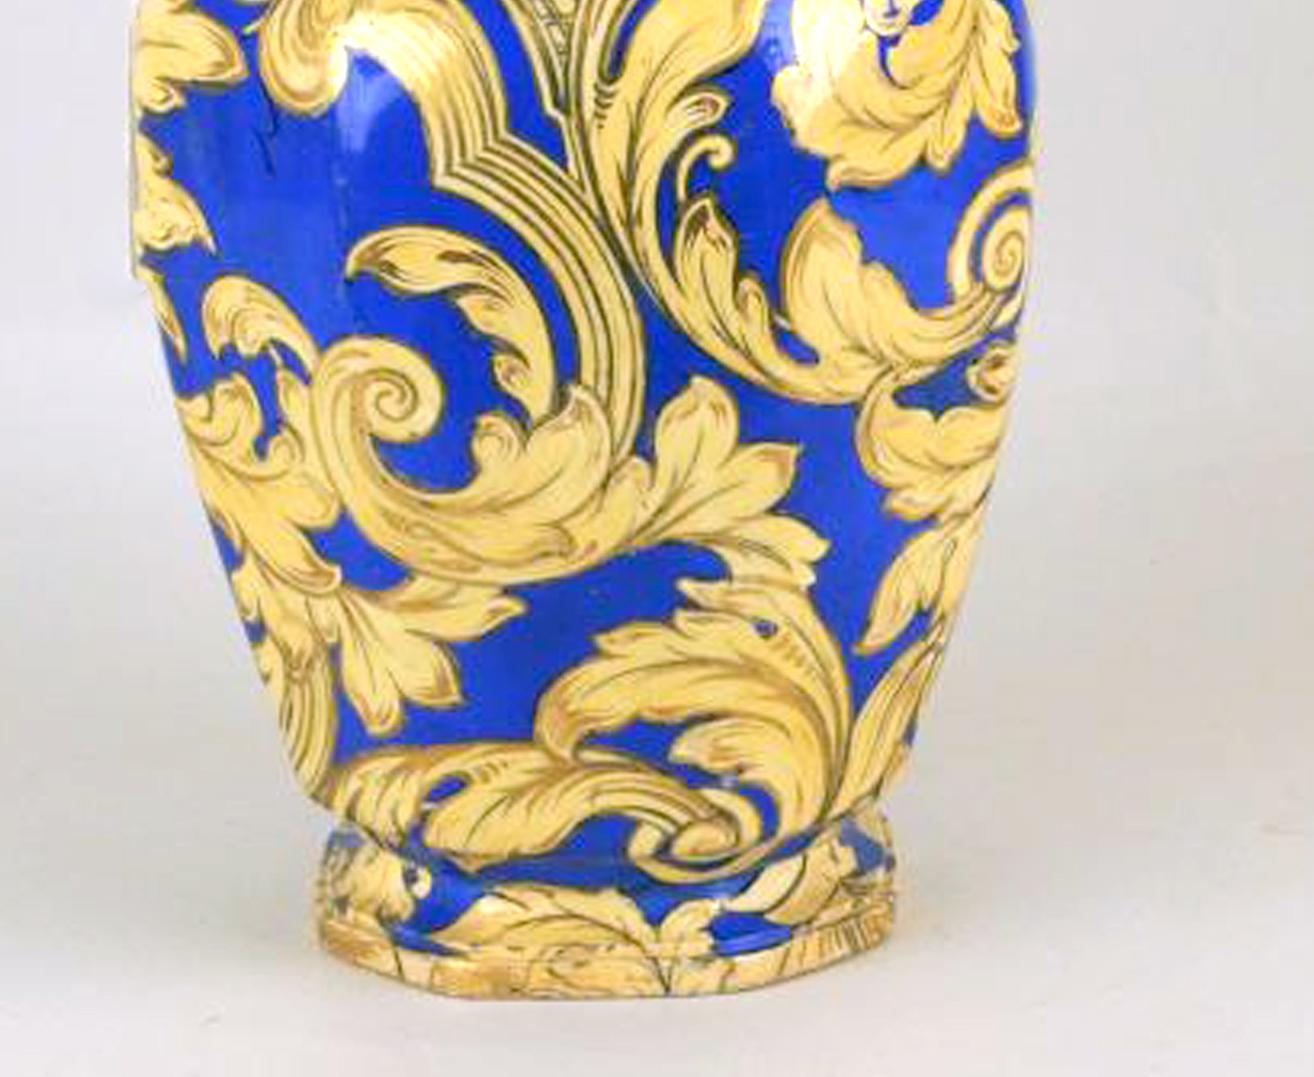 The octagonal-from vase has a deep blue ground and is painted in gilt and yellow with Rococo scrolls of foliage and vases of flowers. The dragon scroll handles and decorated with gilt heighten yellow, The double dolphin finial is similarly